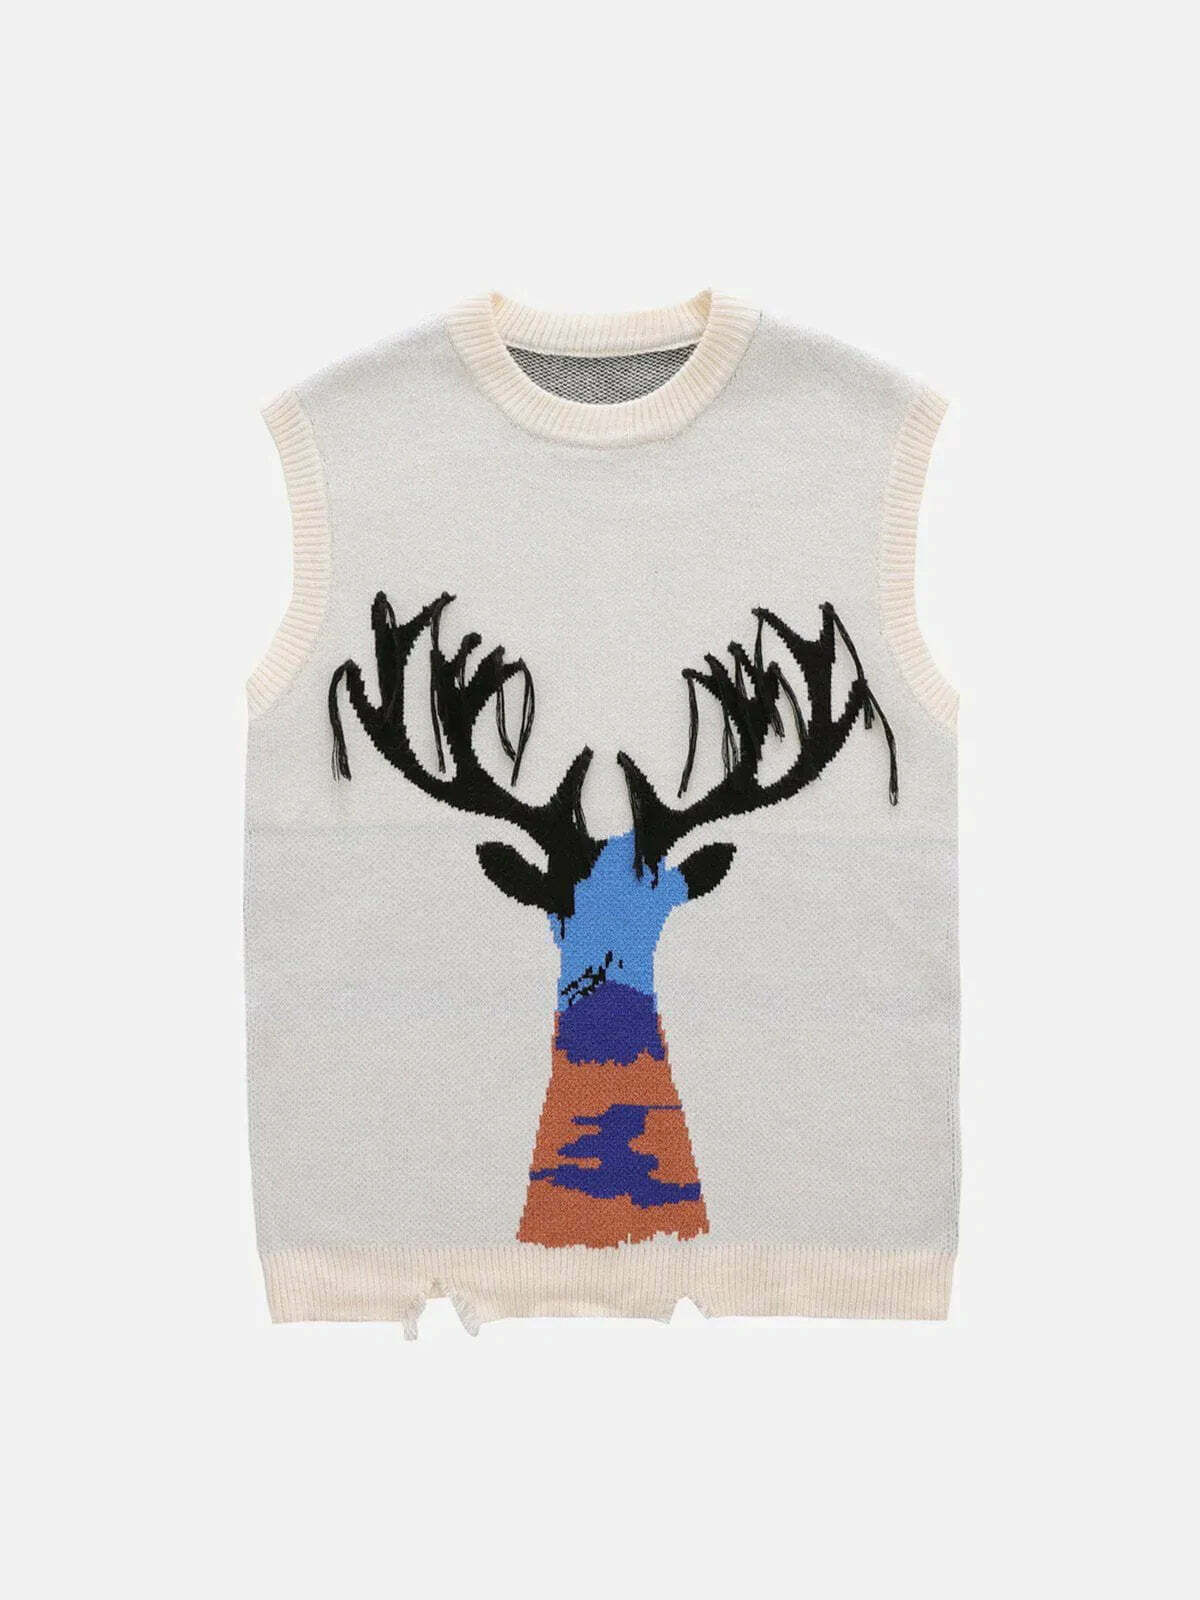 youthful deer graphic sweater edgy  retro streetwear essential 3821